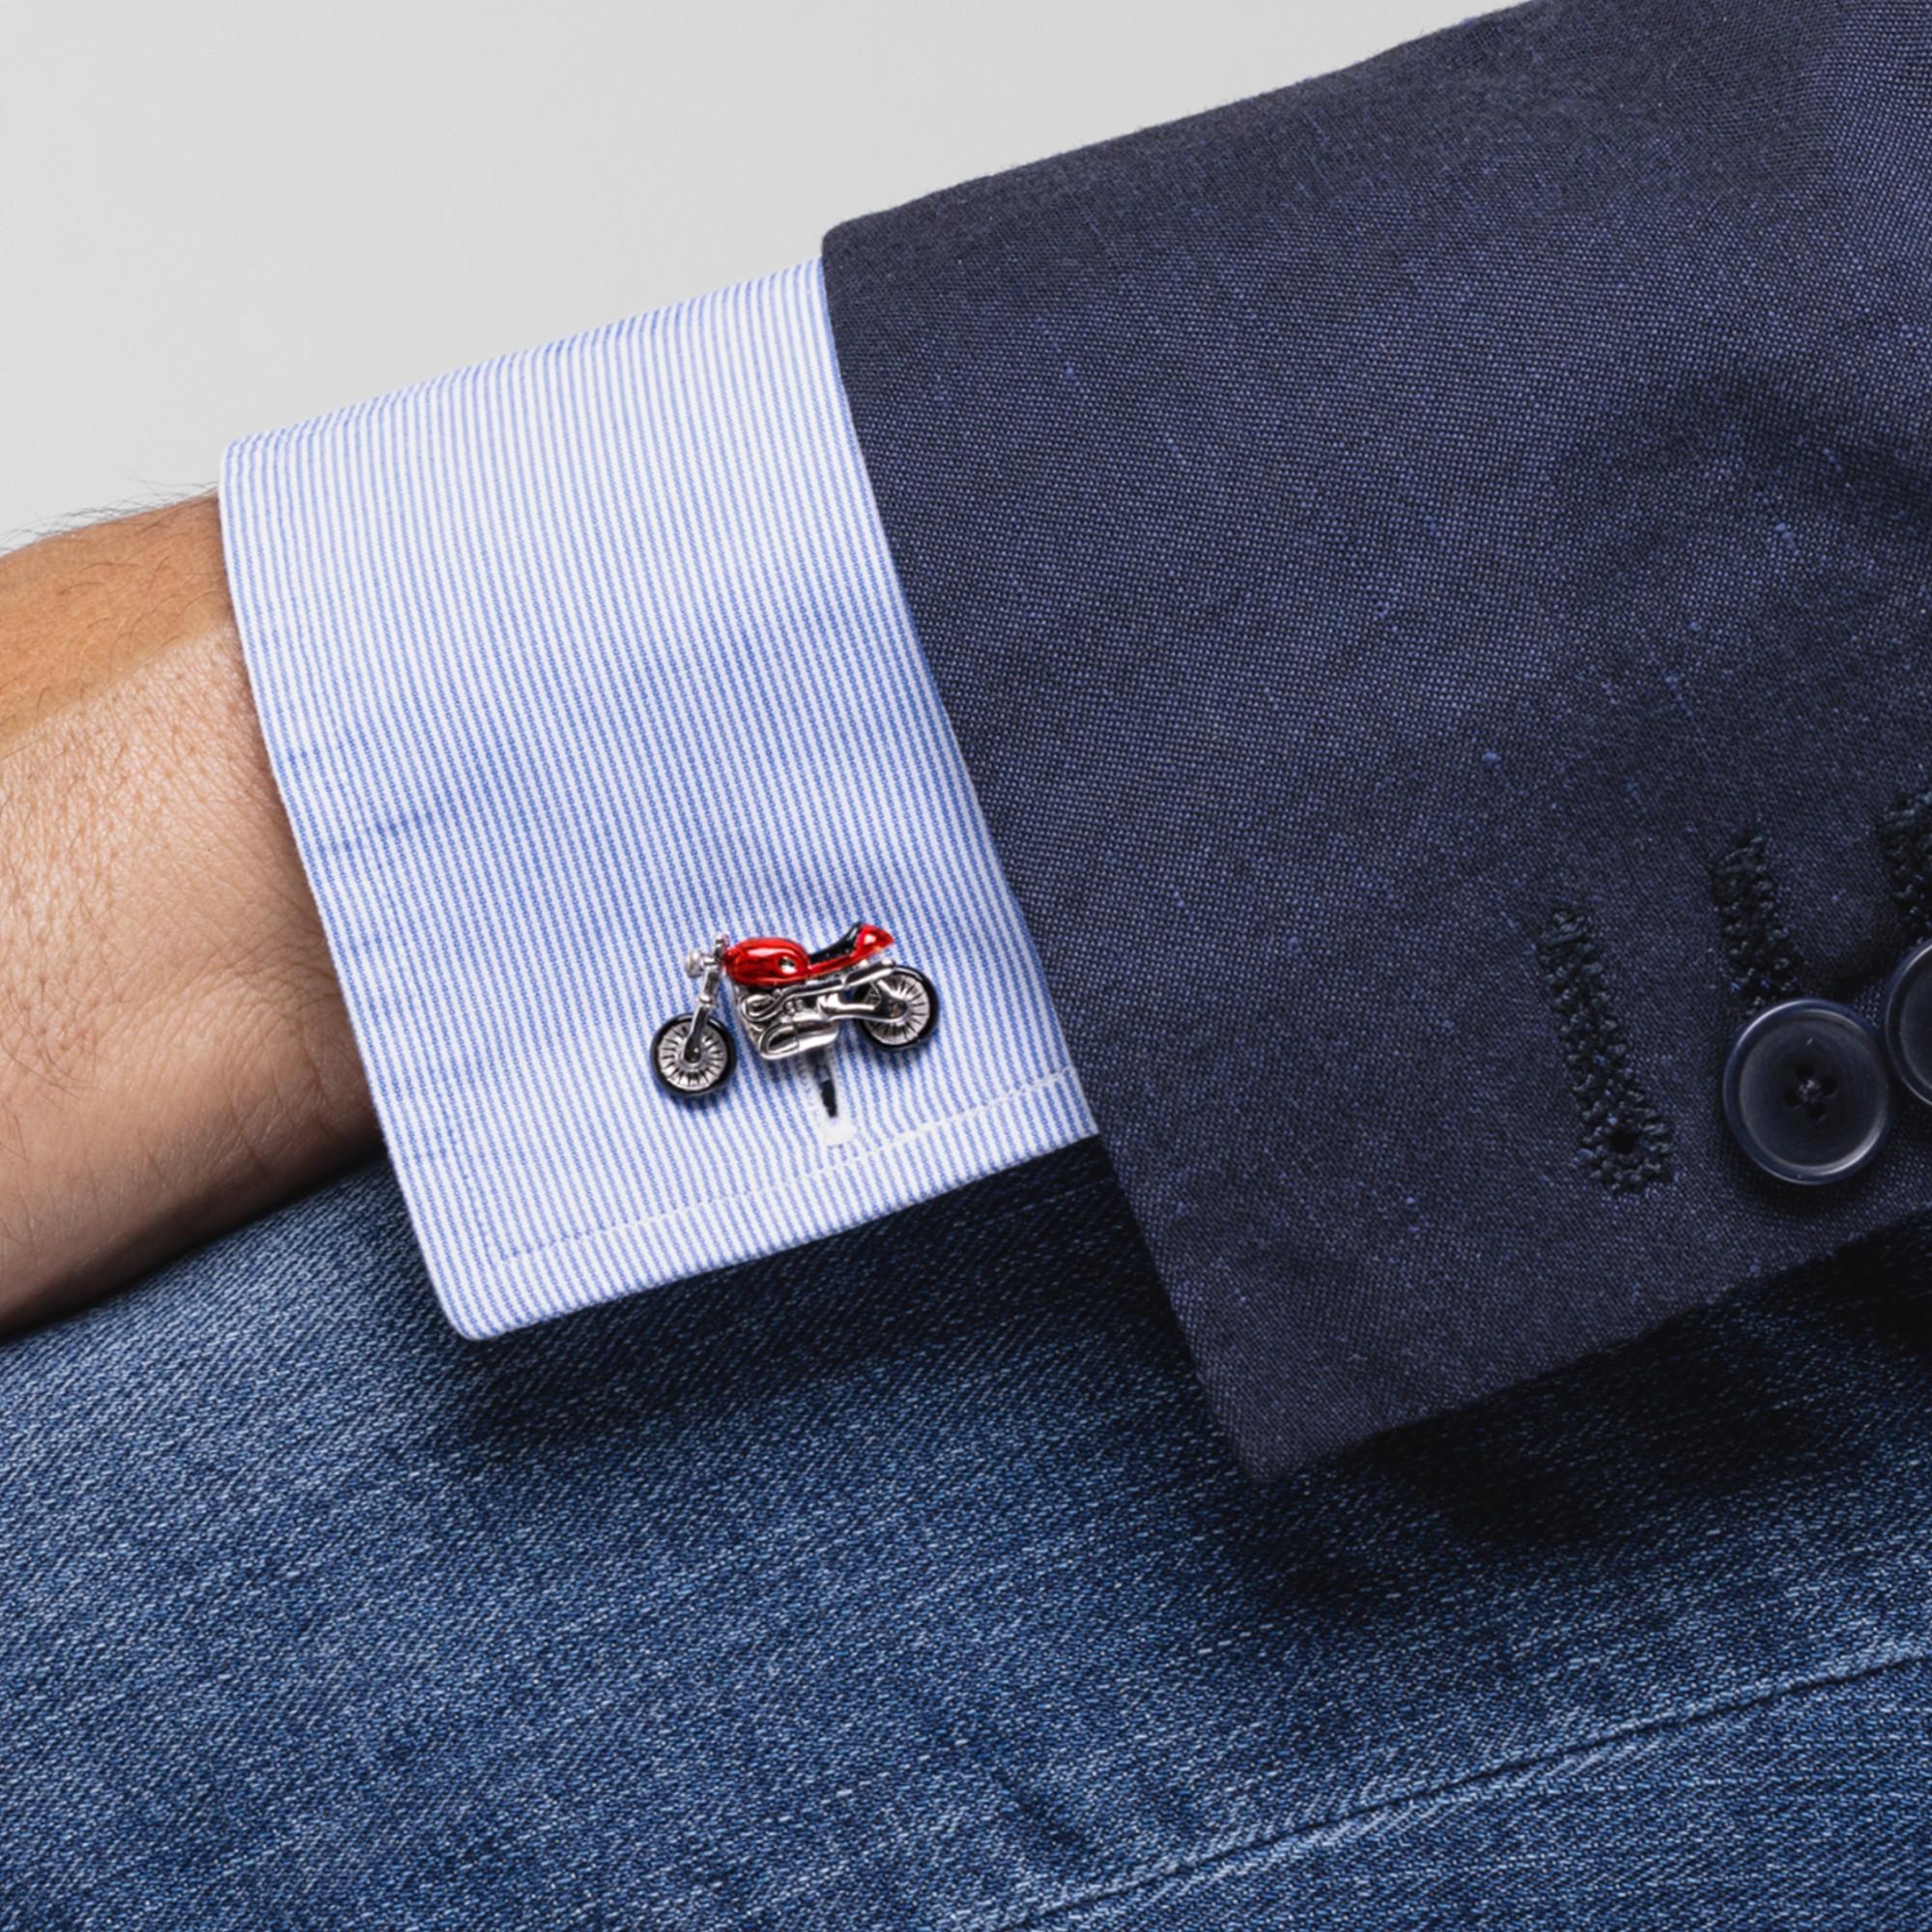 Alex Jona design collection, hand crafted in Italy, sterling silver orange enamel motorcycle cufflinks. The seat is in onyx. Marked JONA. Dimensions 0.95 in W x 0.52 in H

Alex Jona cufflinks stand out, not only for their special design and for the